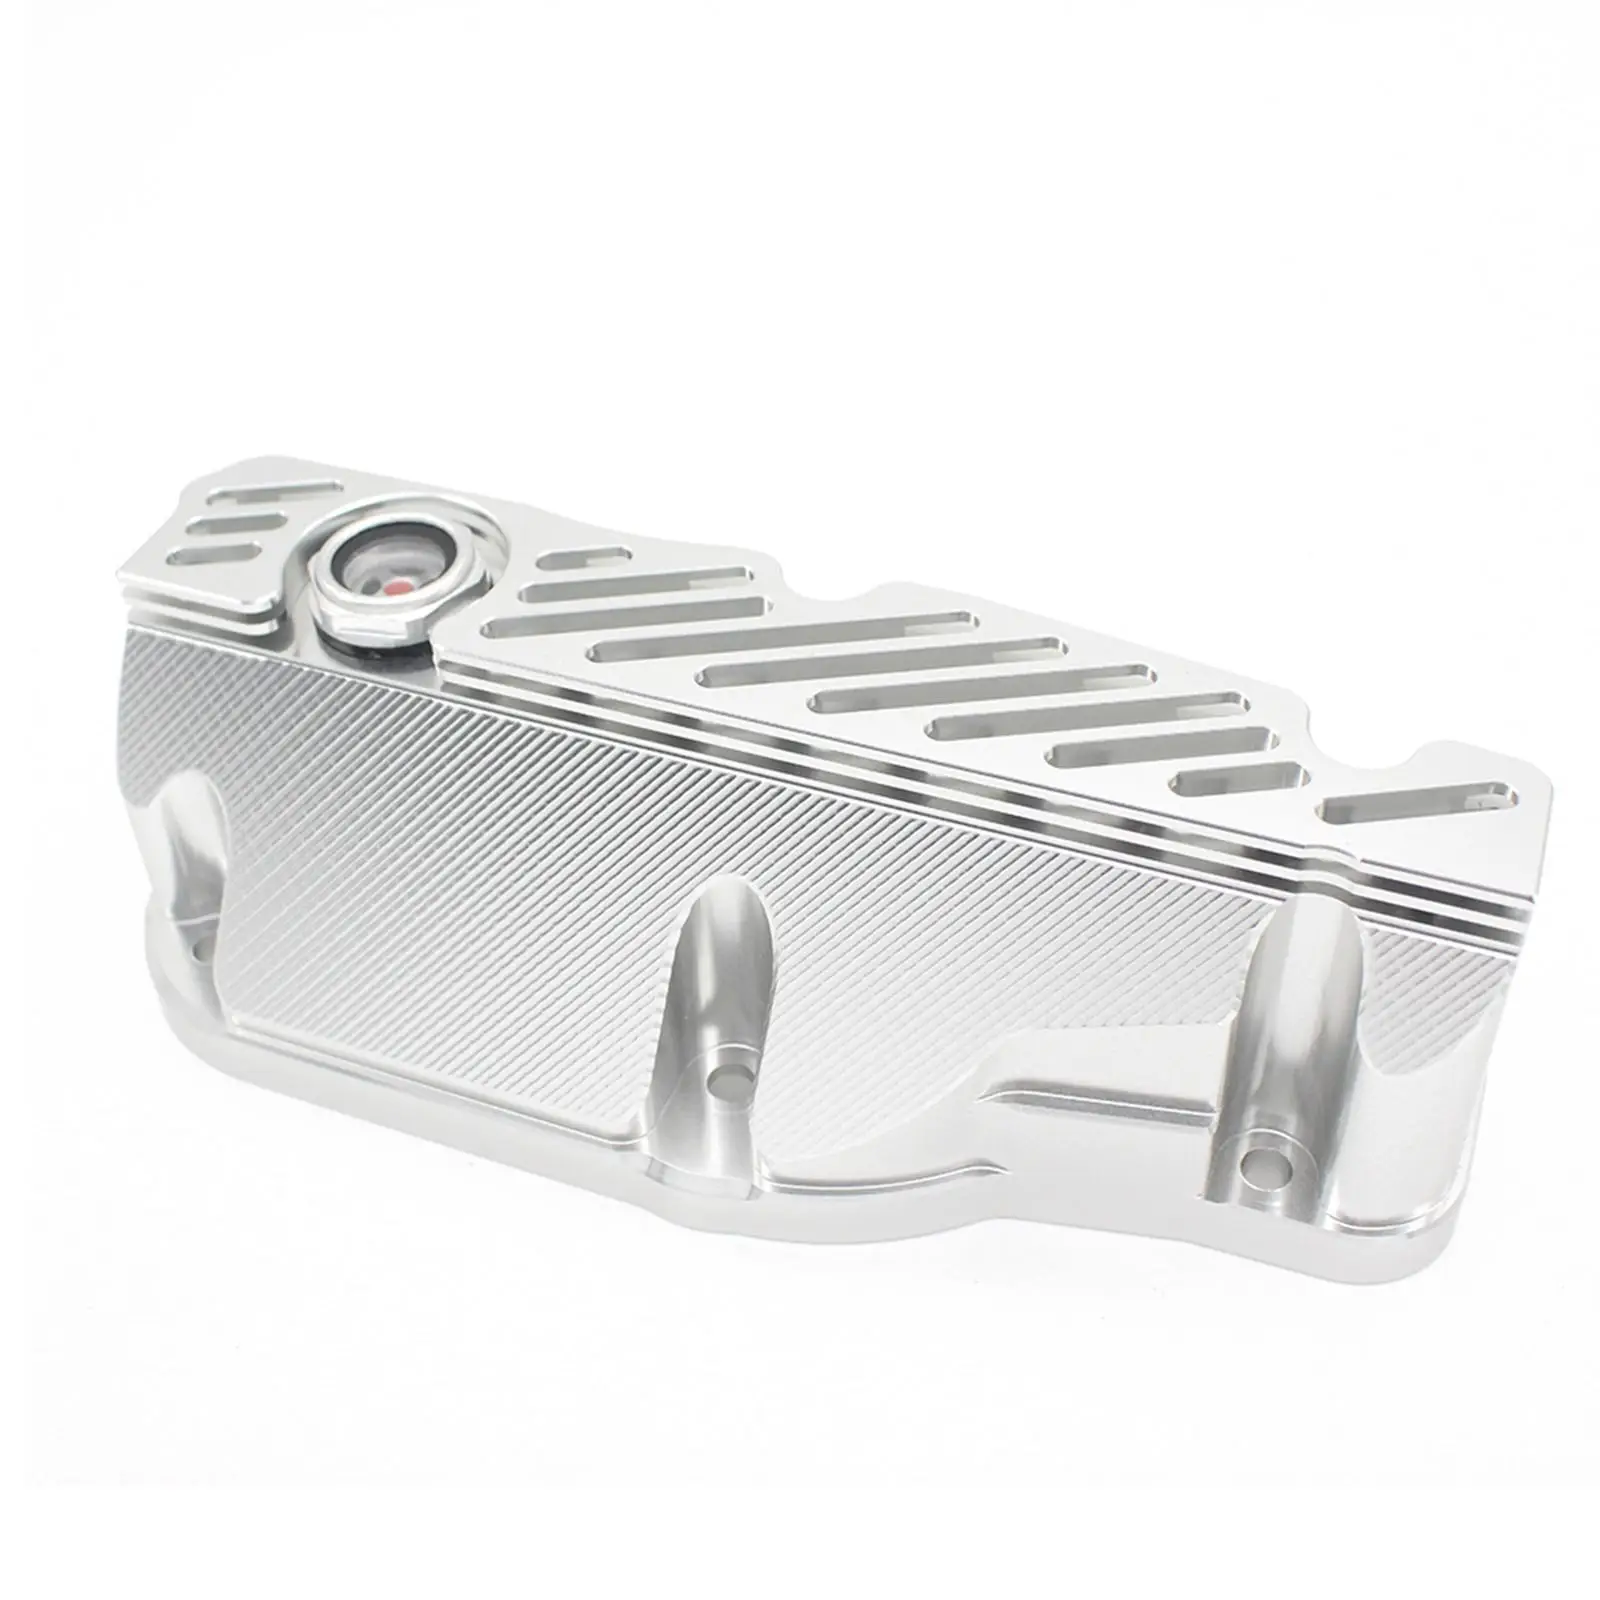 Sump Engine Oil Pan Aluminum Alloy for Vespa GTS-300 Car Accessories Easy to Install High Performance Engine Parts